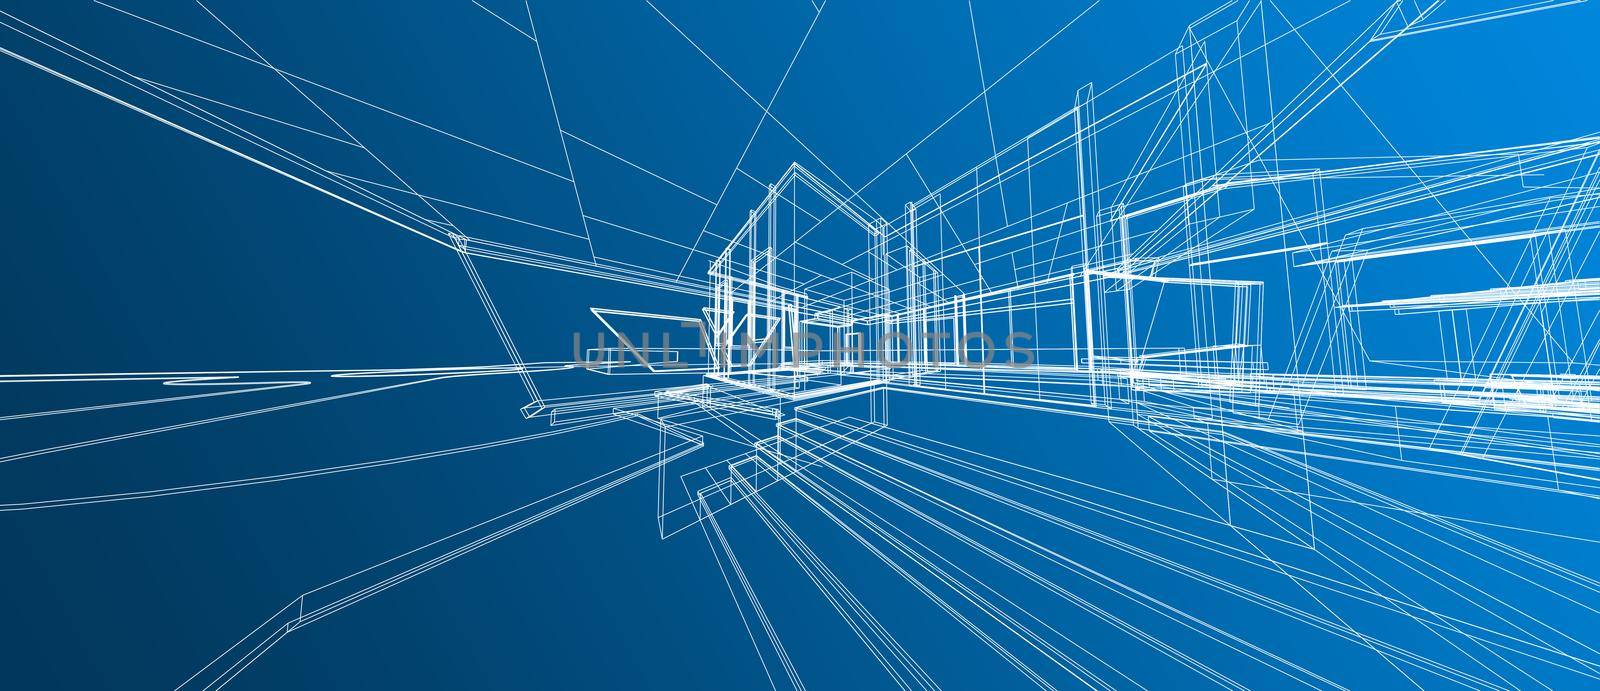 Architecture house space design concept 3d perspective wireframe rendering over blue background. For abstract background or wallpaper desktops computer smart technology design architectural theme.